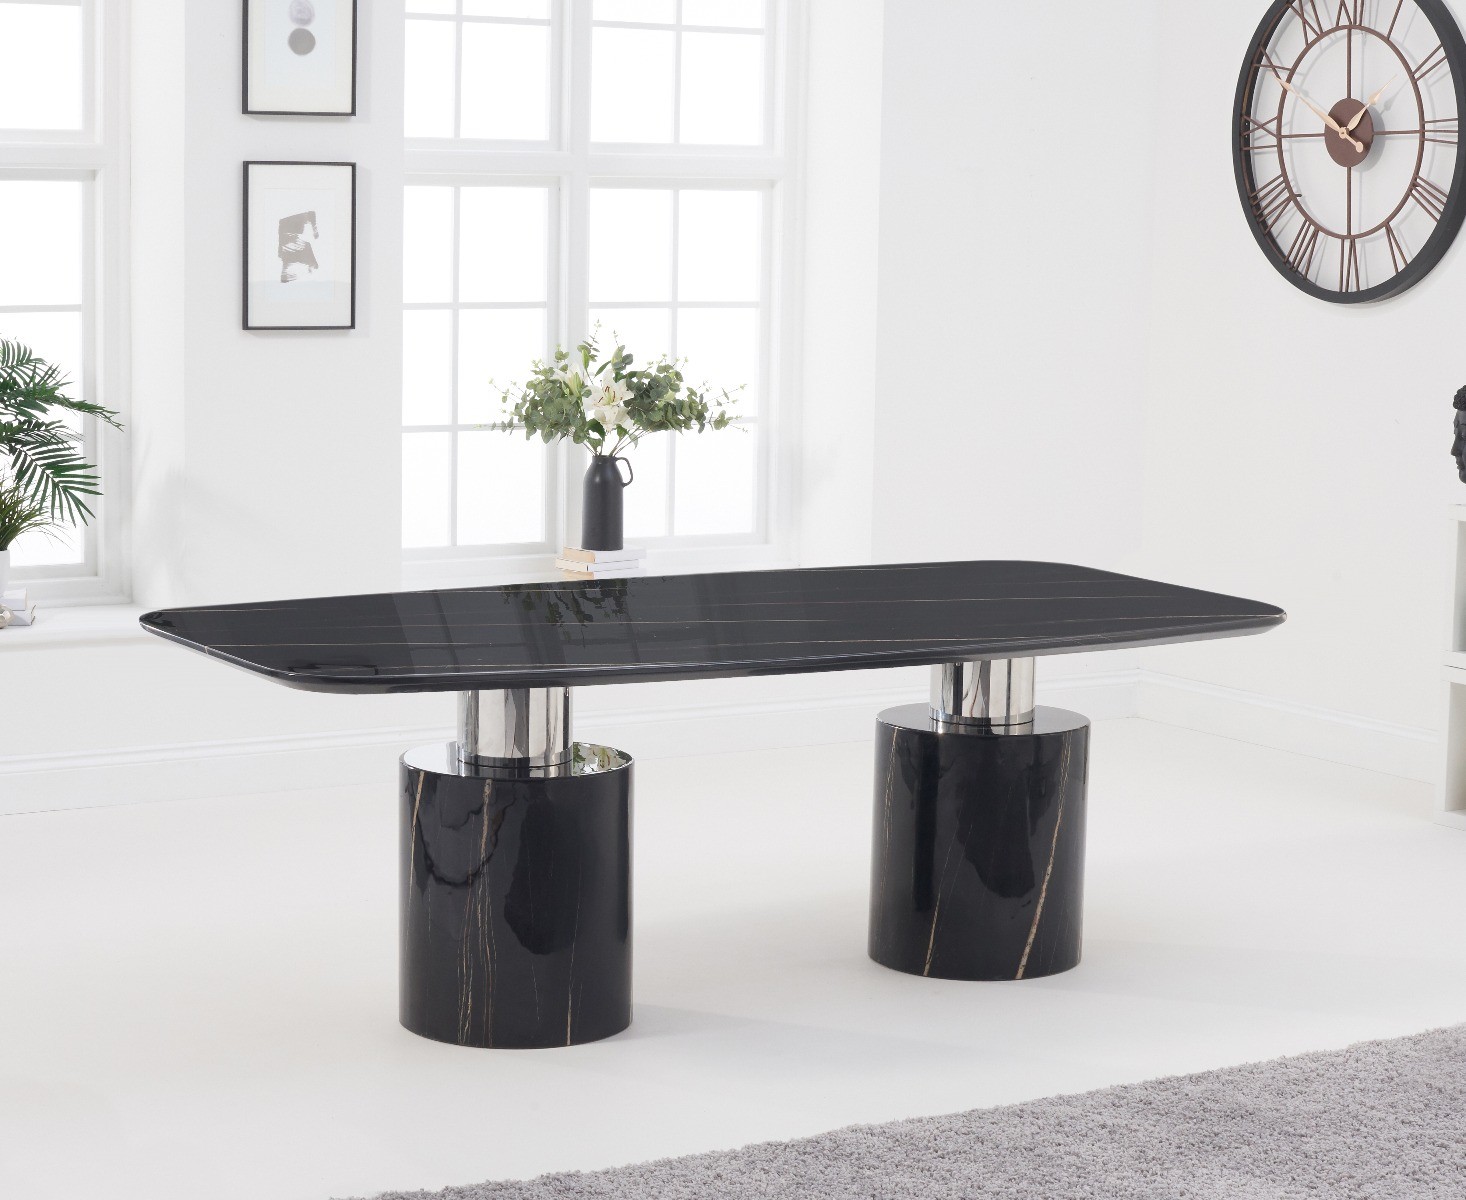 Photo 3 of Antonio 220cm black marble dining table with 10 grey sophia chairs